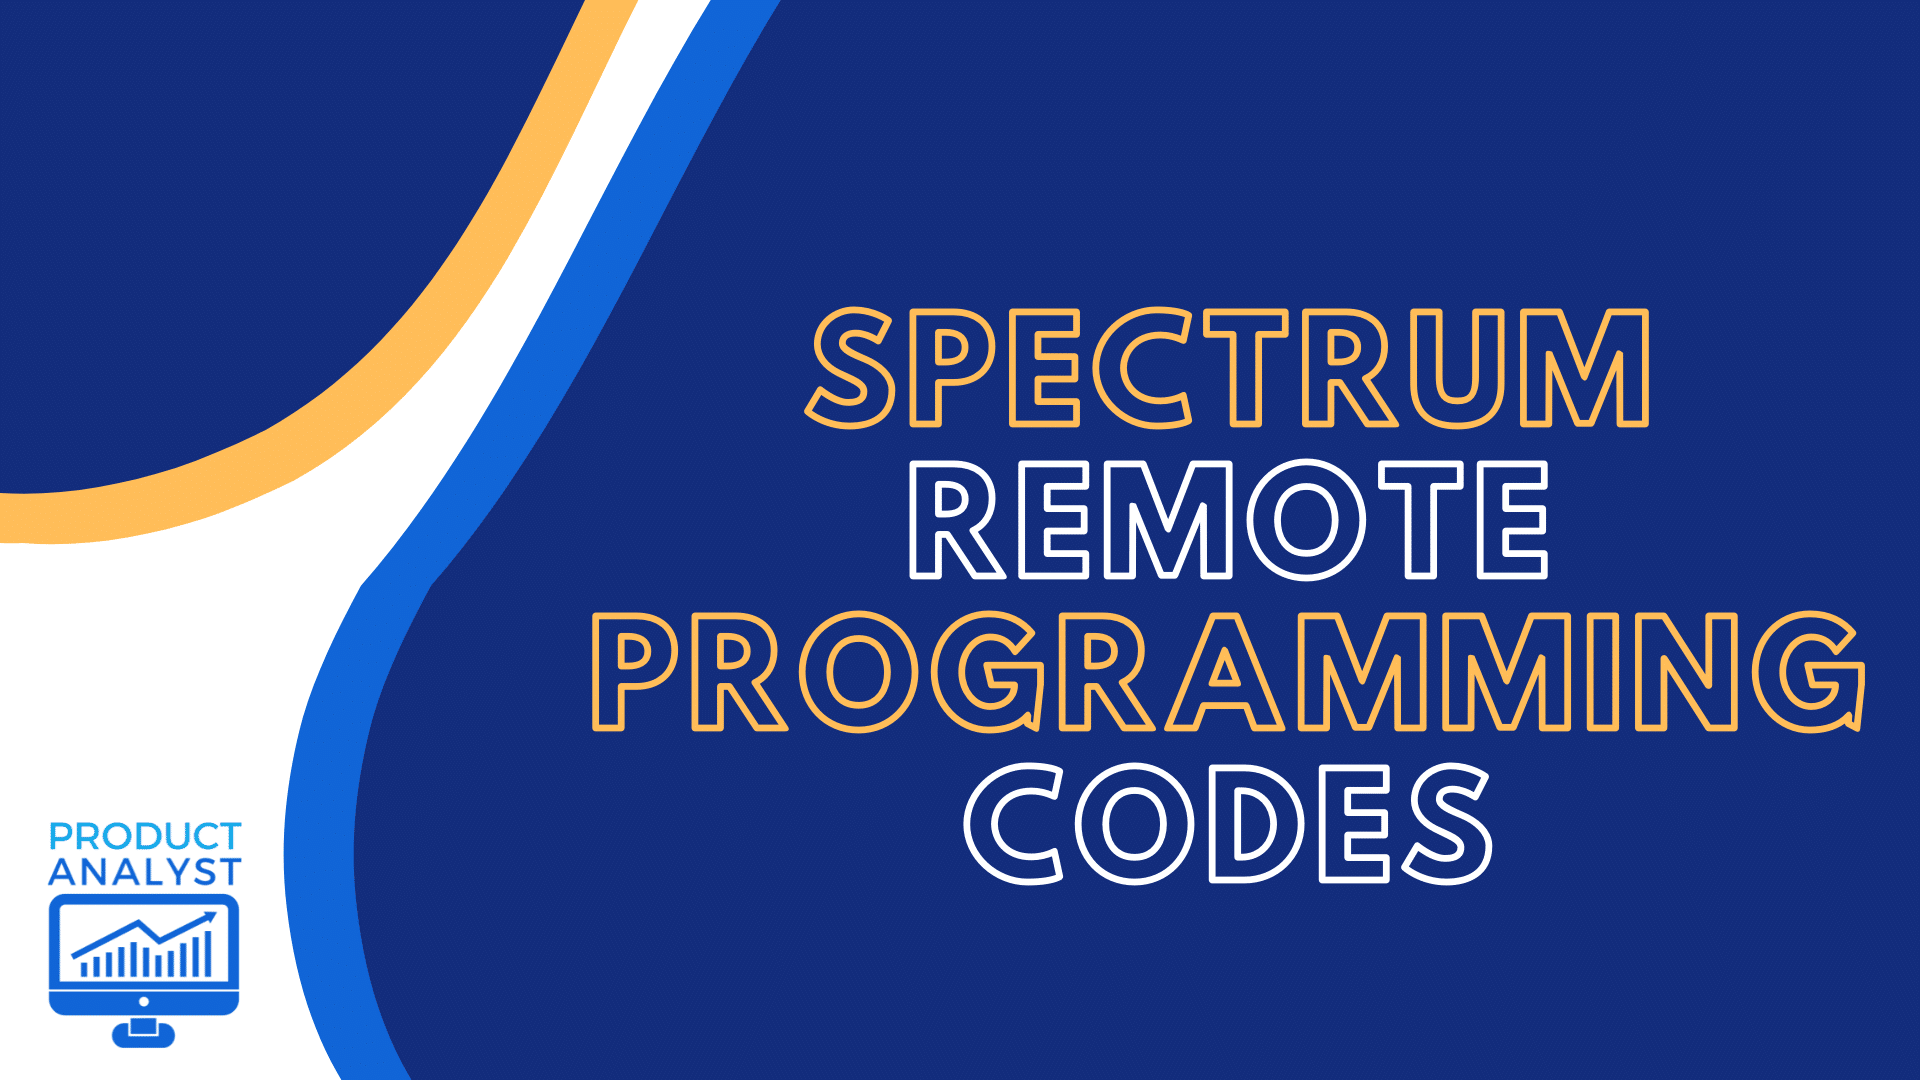 4. Spectrum Remote Codes for ONN TV - wide 3